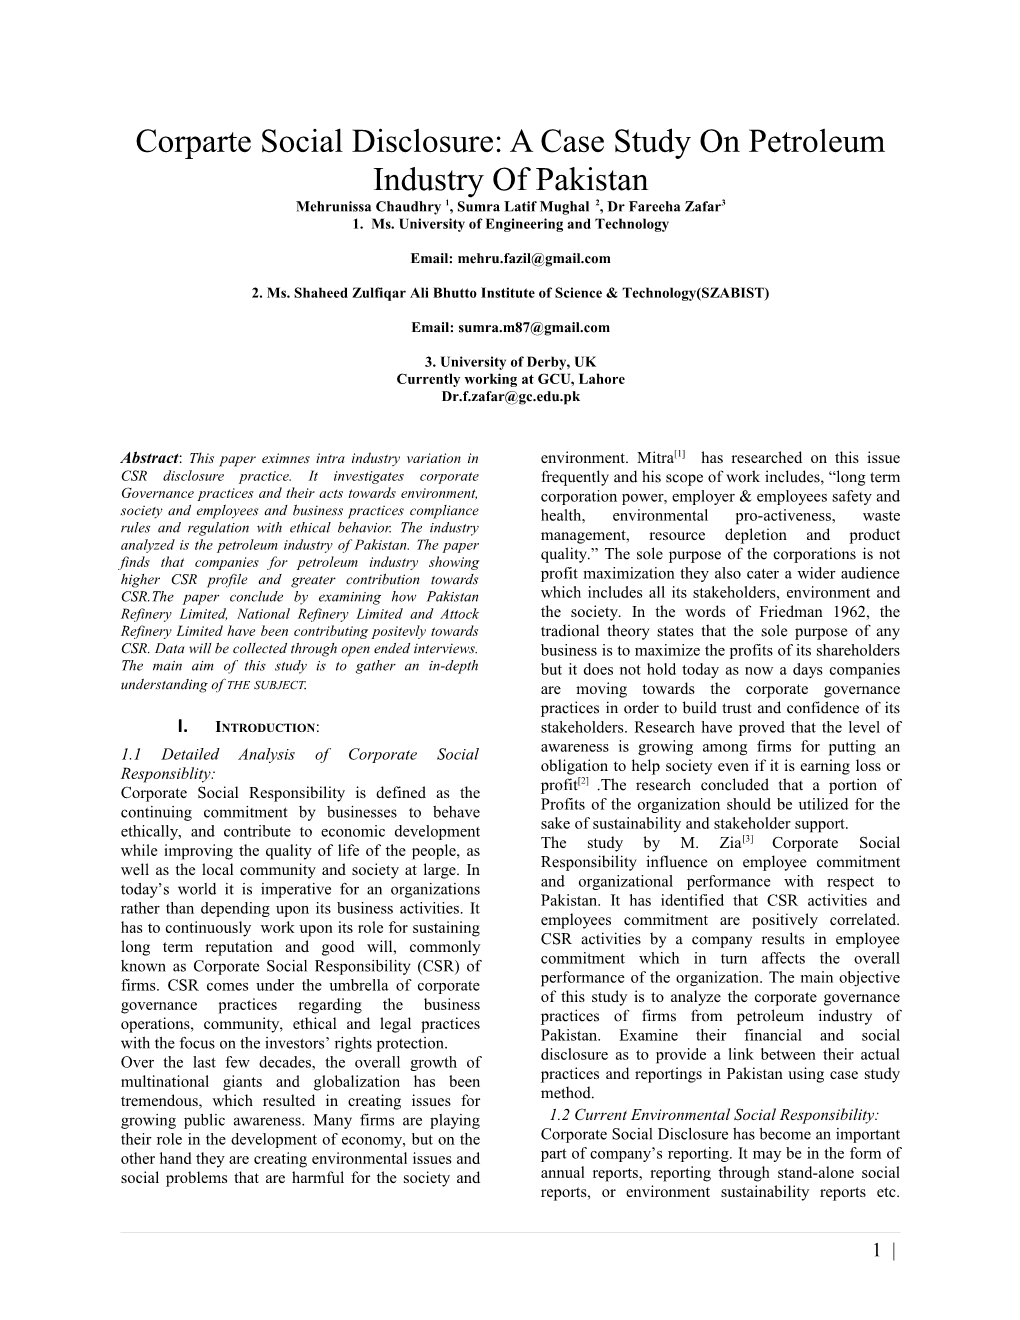 Corparte Social Disclosure: a Case Study on Petroleum Industry of Pakistan